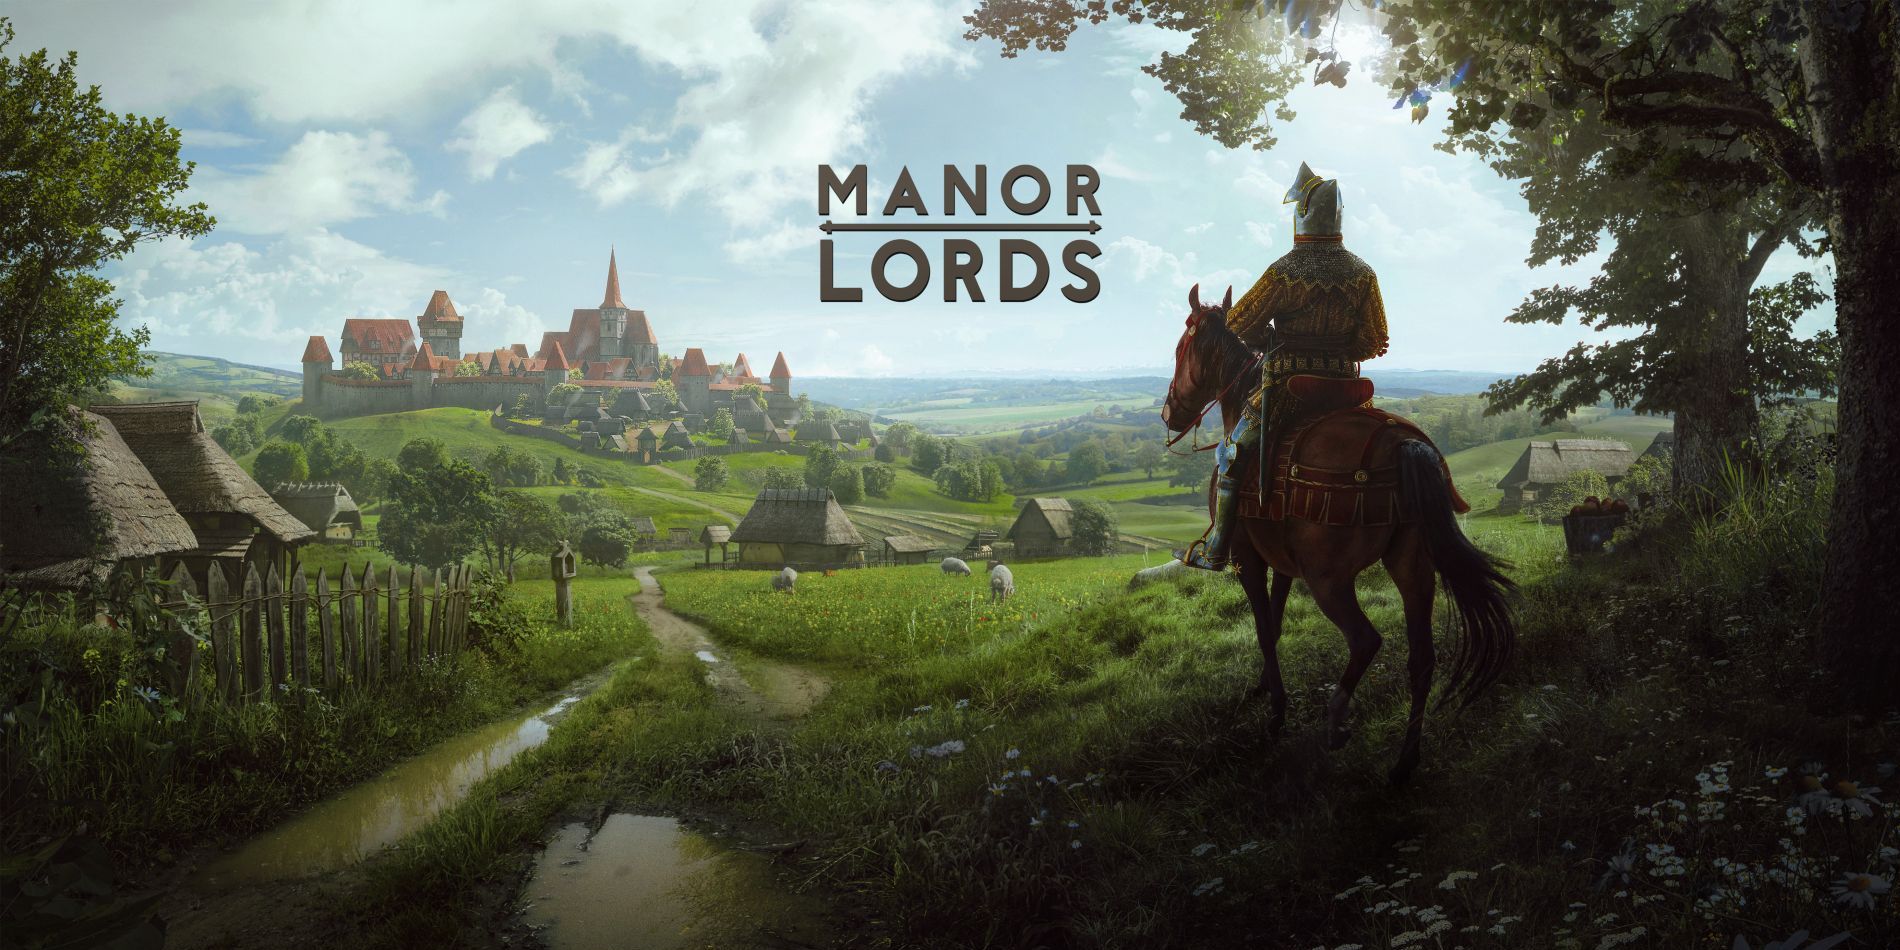 A lord rides a brown horse down a grassy road, toward a hilltop village with high walls and spires rising from it, in key art from Manor Lords.(1)